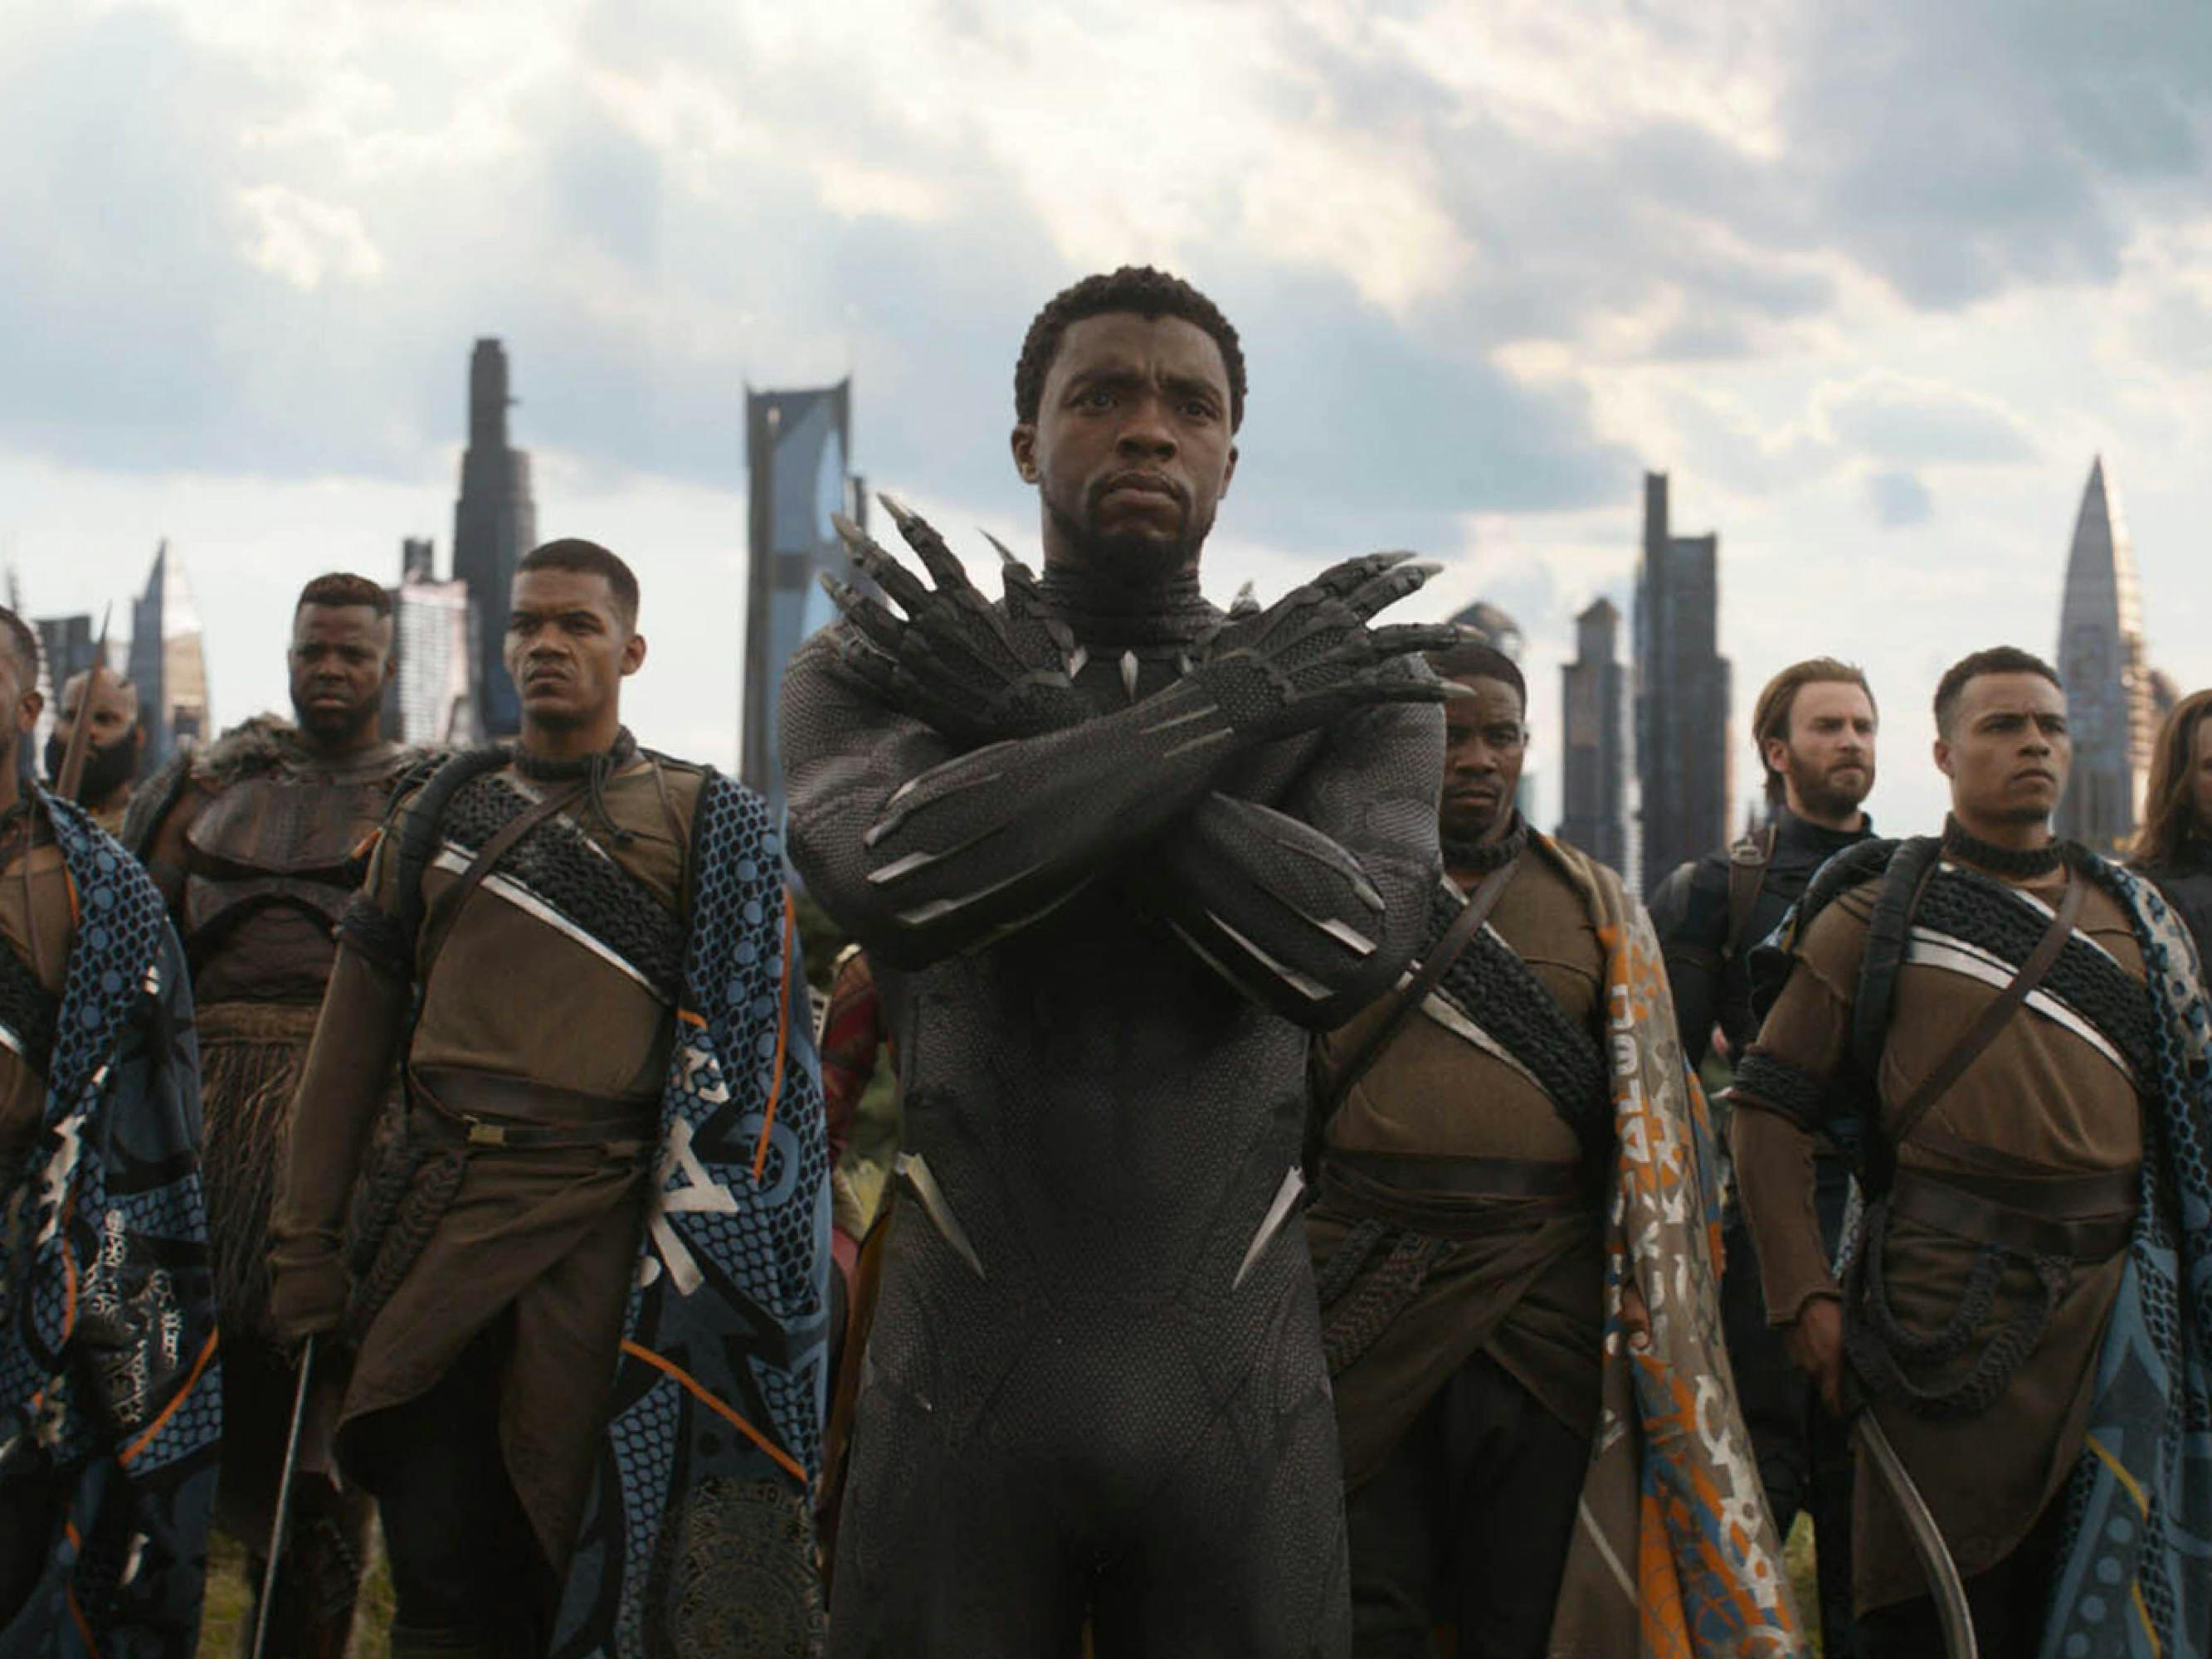 Chadwick Boseman as T’Challa, wearing his sleek suit. He is flanked by other warriors, and Wakanda’s skyline is in the background. He looks ready for battle.